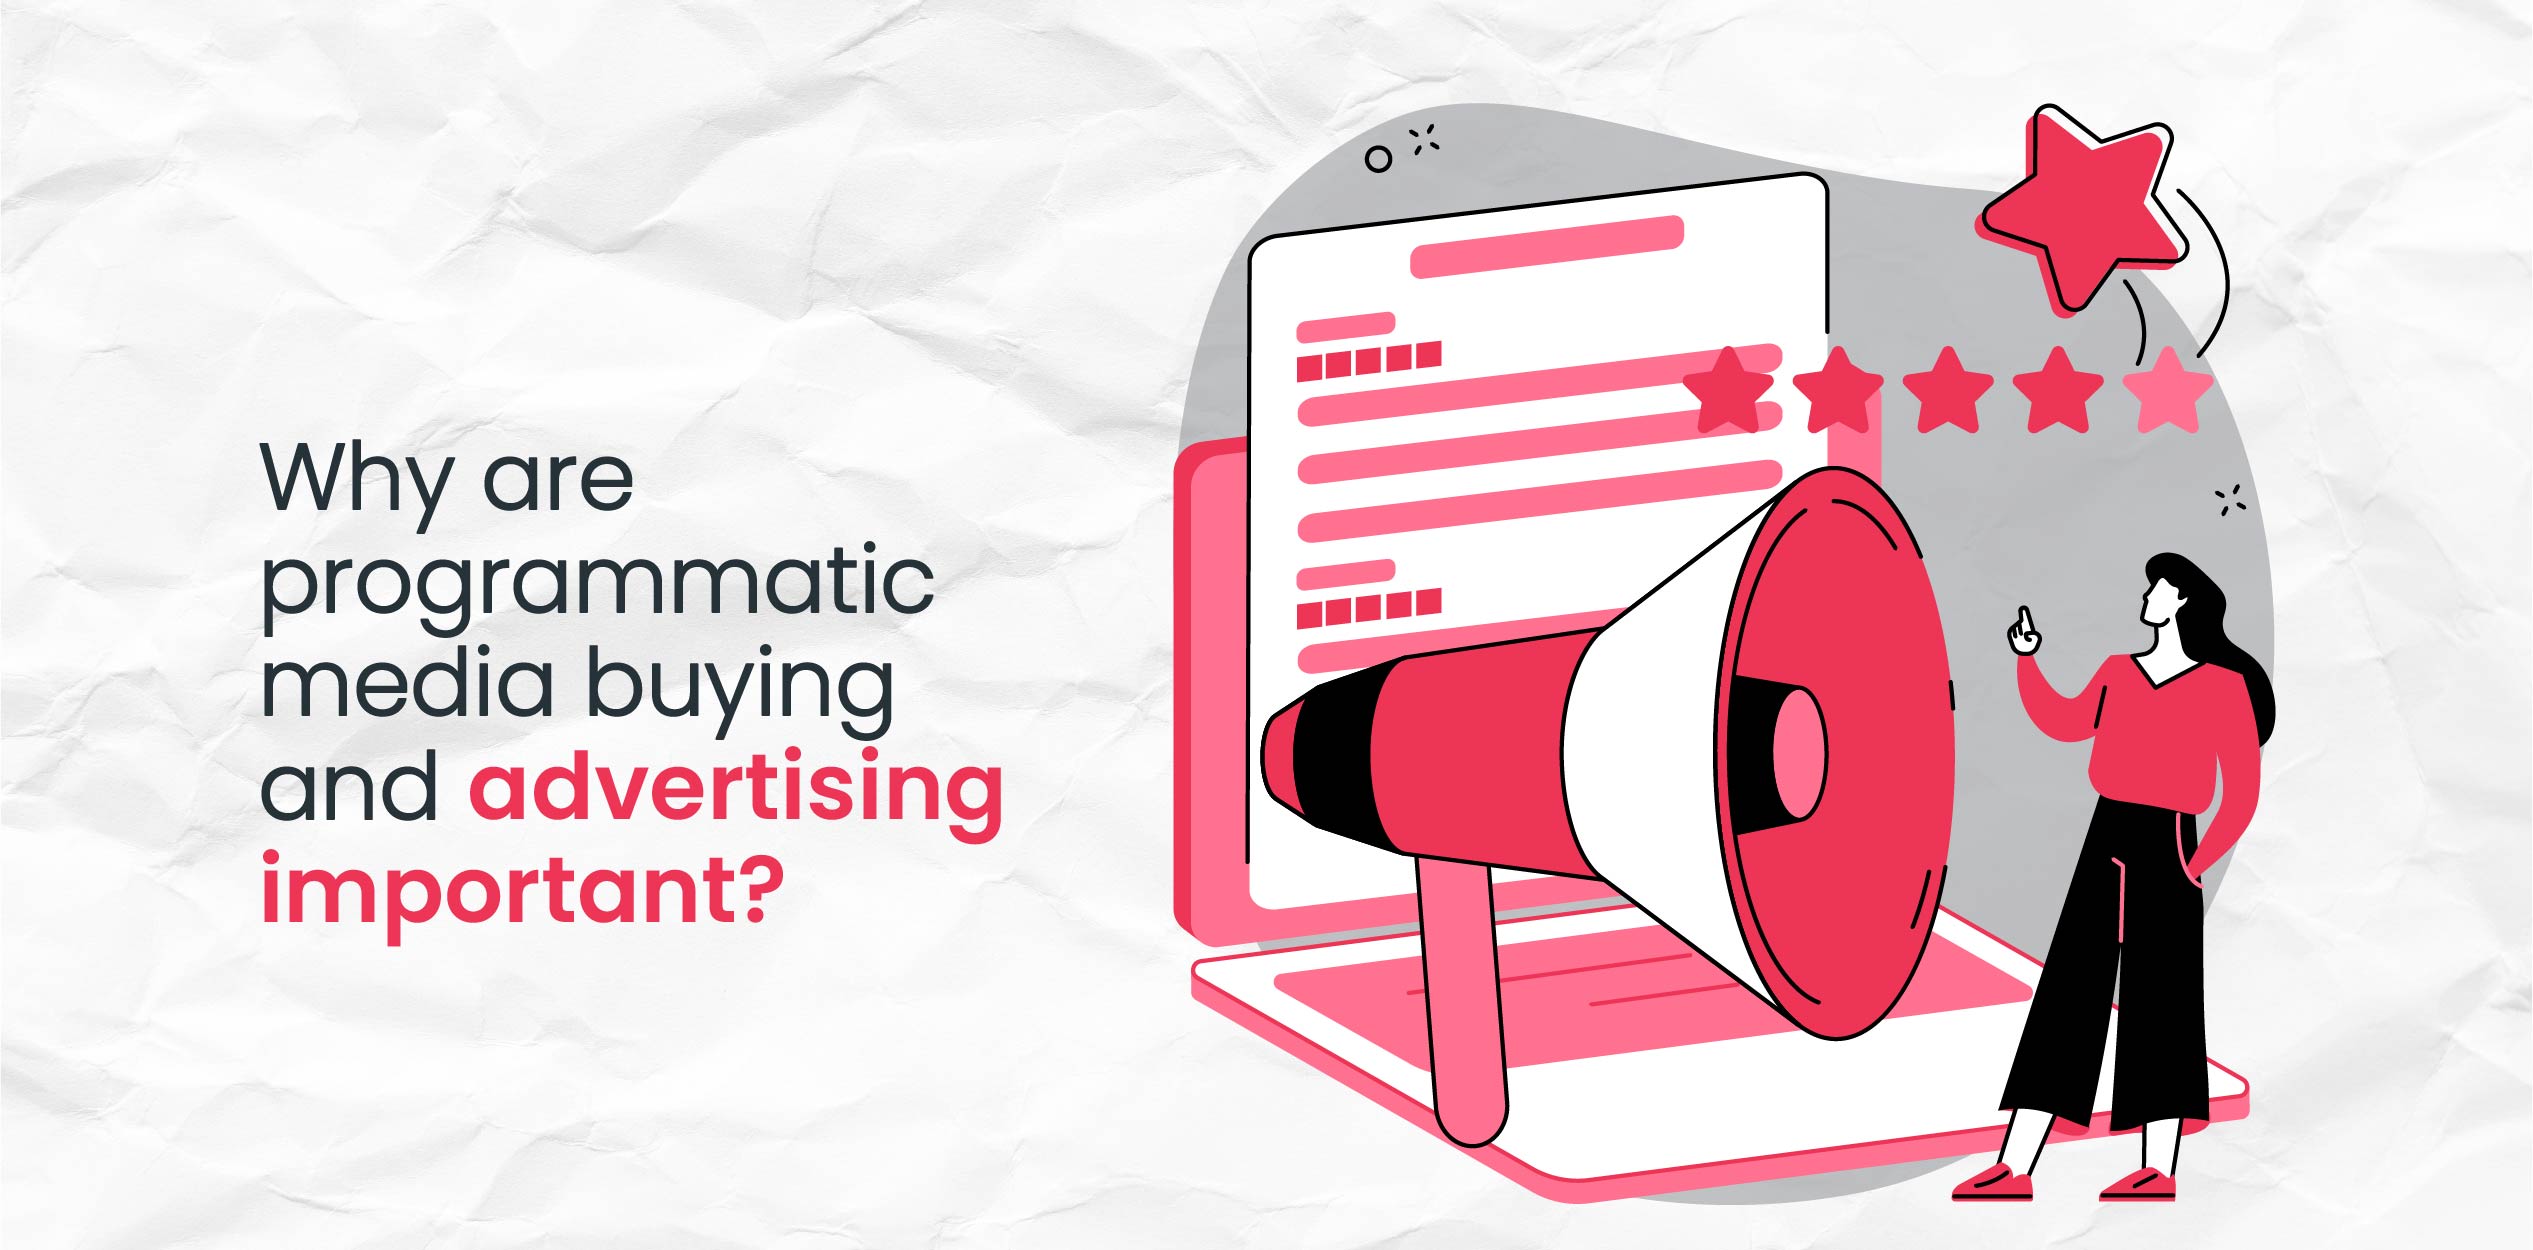 Why are programmatic media buying and advertising important?